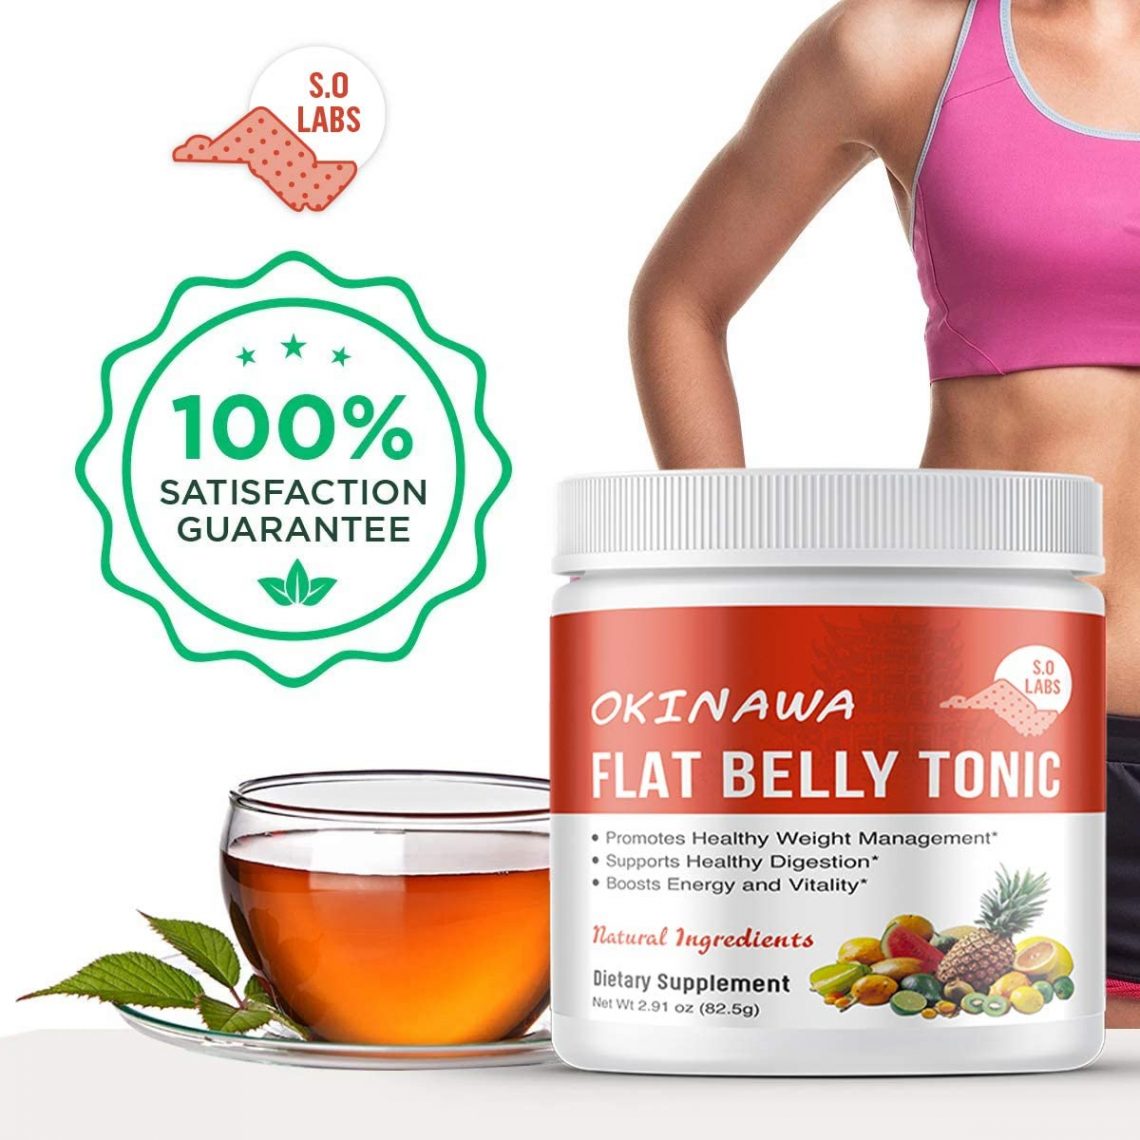 does okinawa flat belly tonic really work reviews